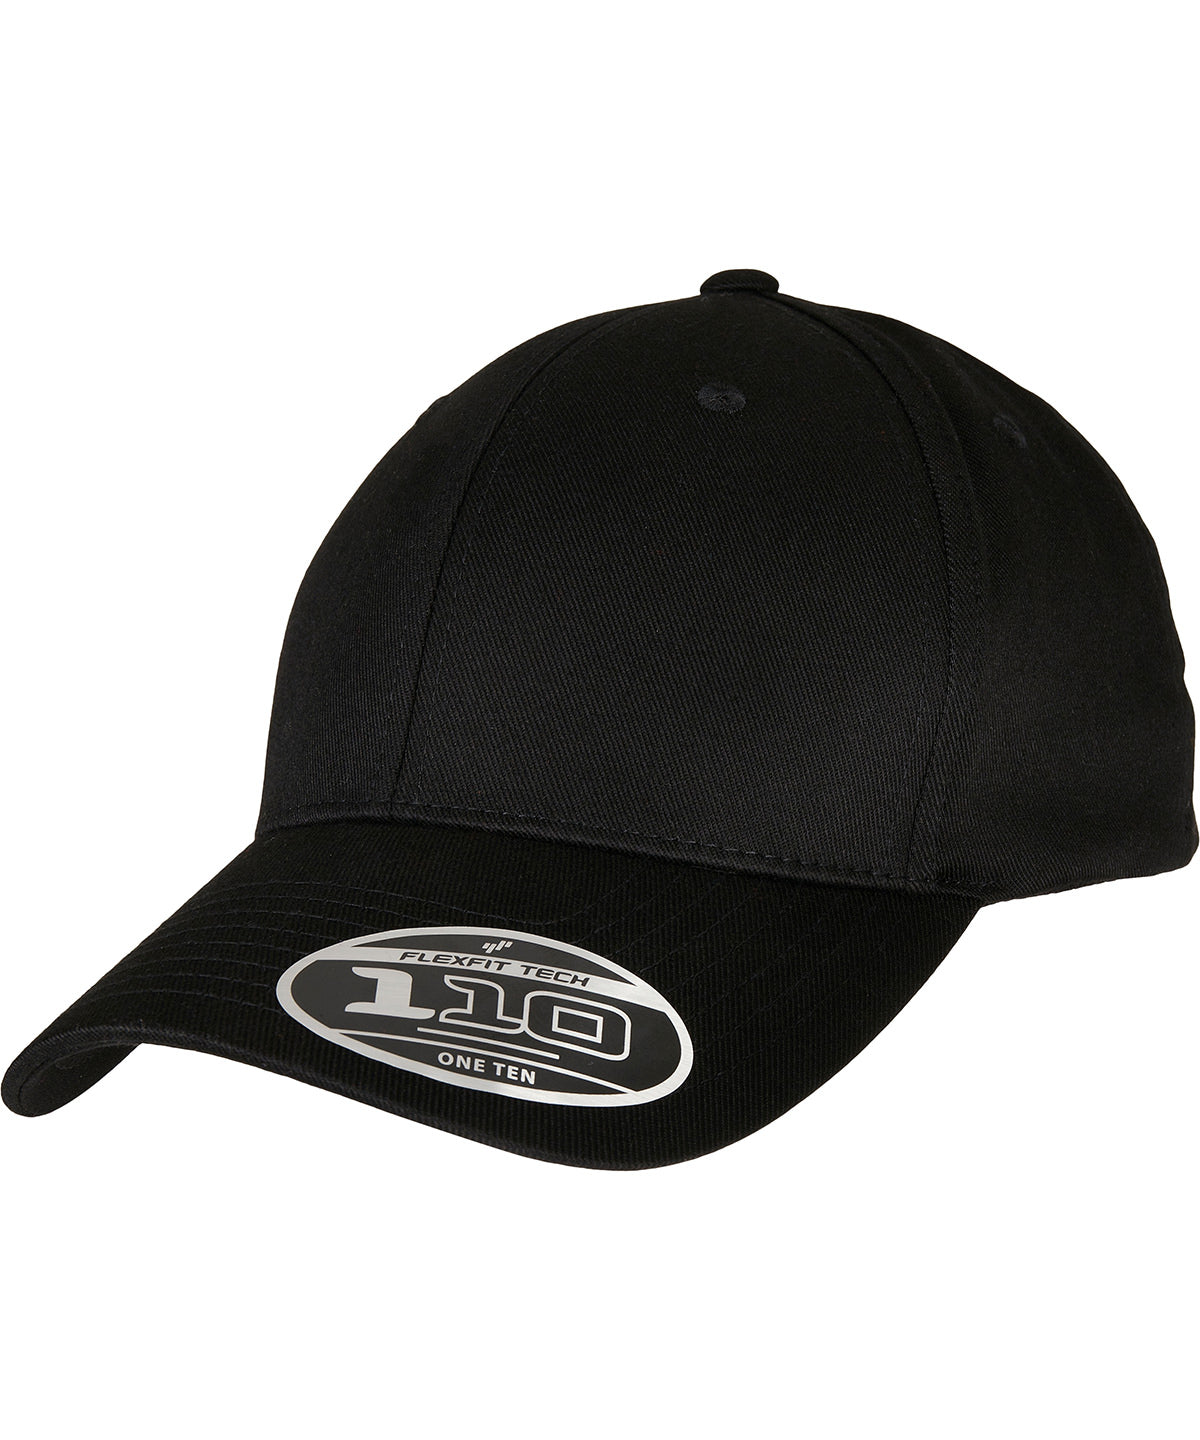 Embroidered Flexfit by Yupoong Caps & Hats with your brand logo, FAST! –  Teeone